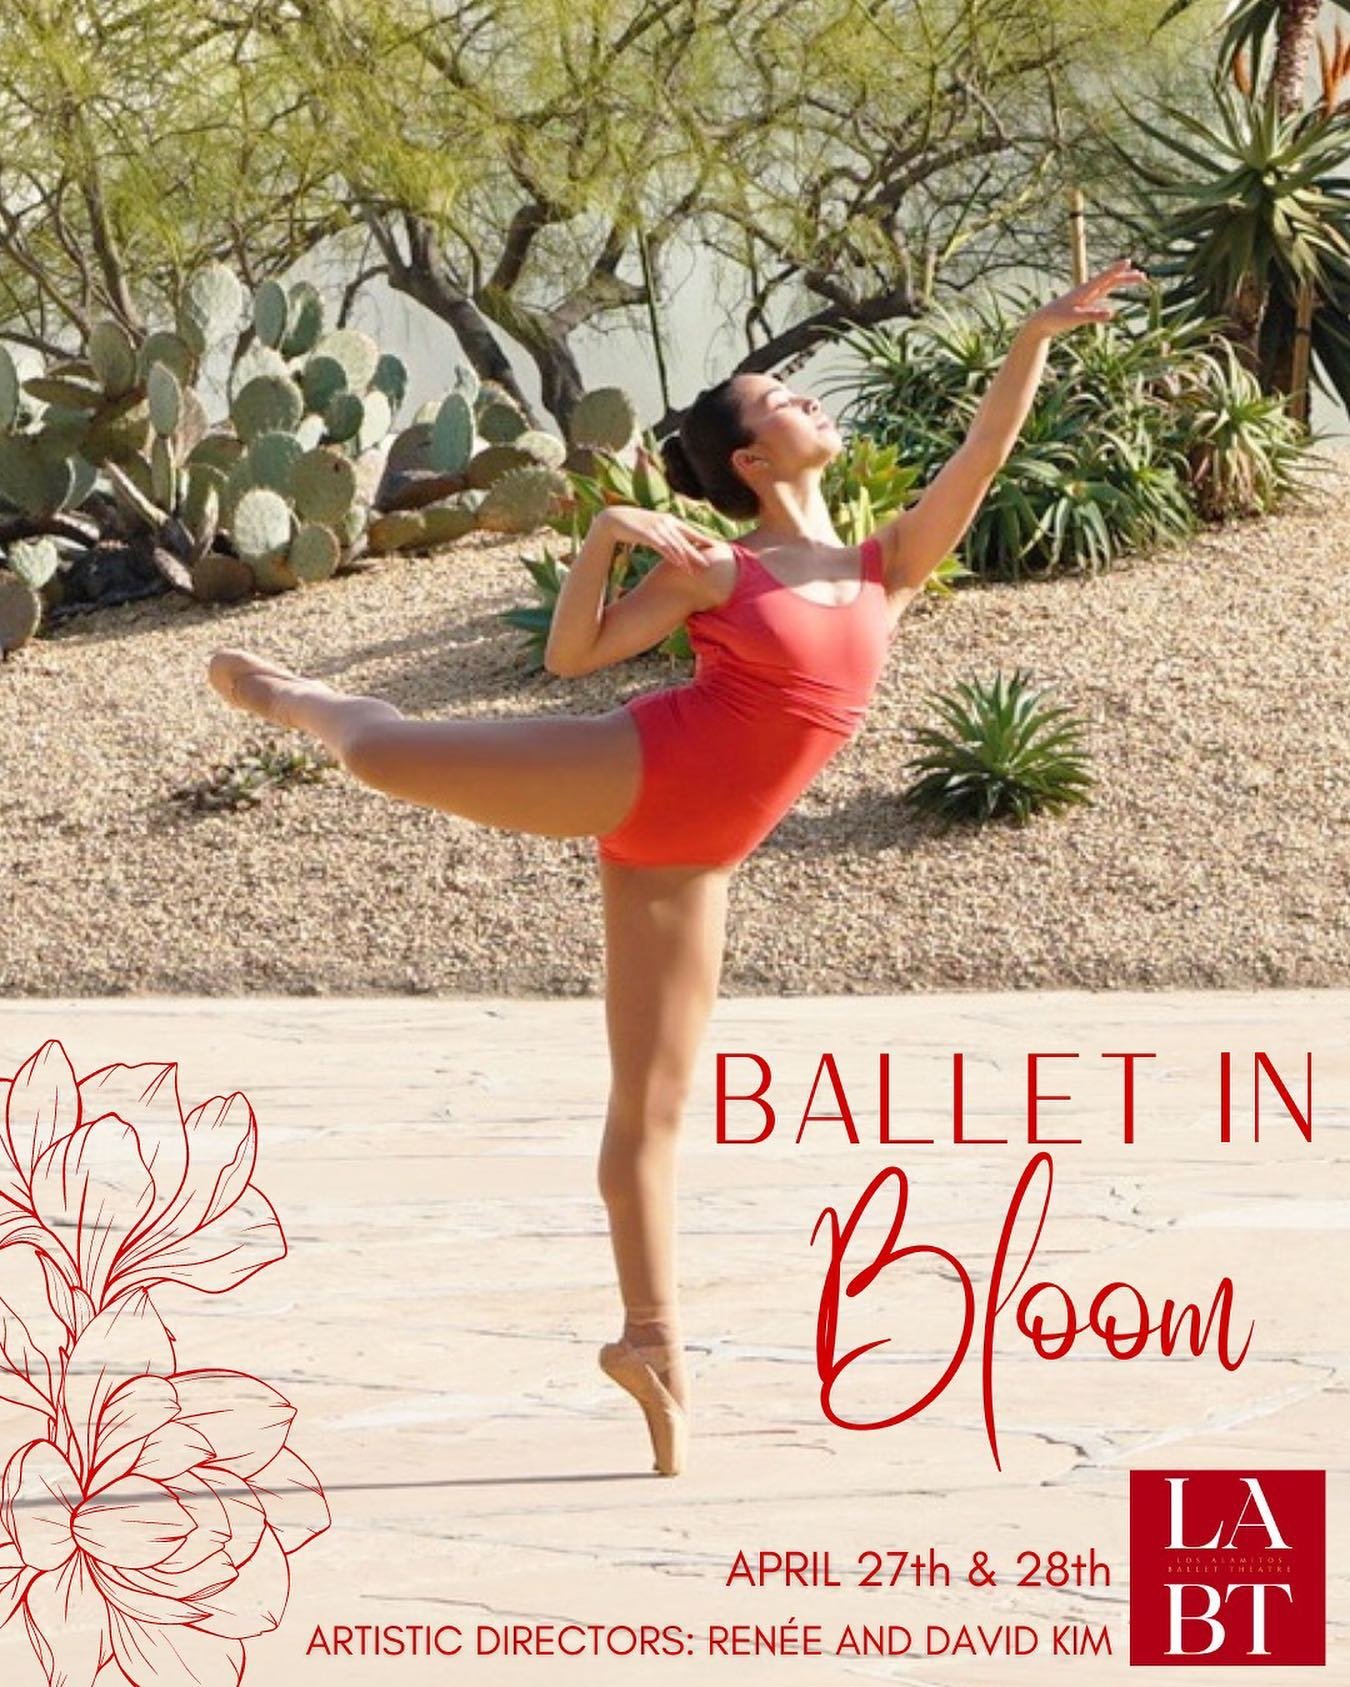 || LABT presents Ballet in Bloom🌹 ||

🎟️TICKETS ARE ON SALE NOW!

Ballet in Bloom is only a week away!
Los Alamitos Ballet Theatre is thrilled to present this incredible event that celebrates collaboration, creativity, and community. Artistic Direc